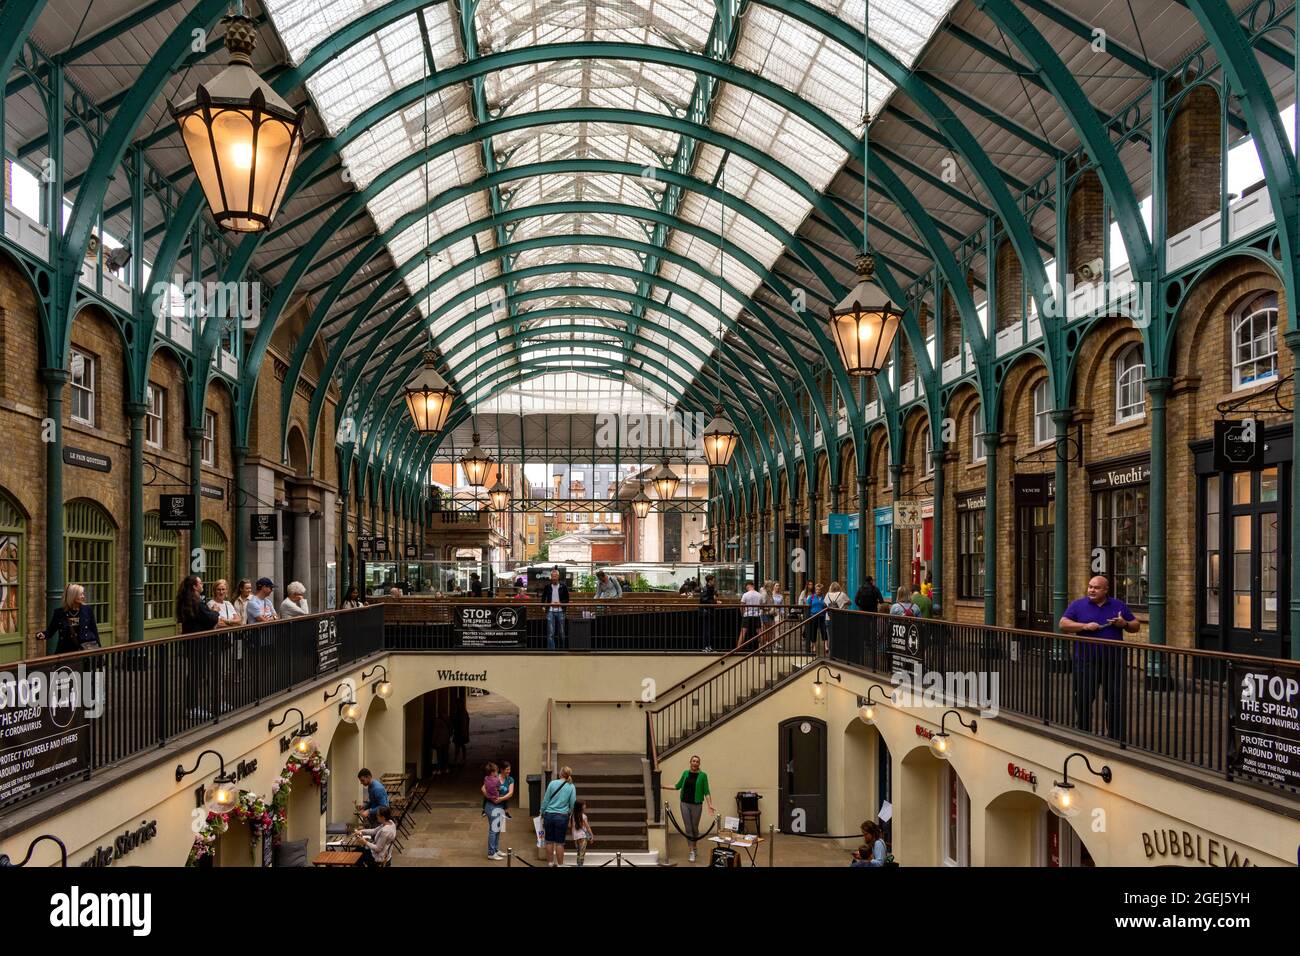 LONDON COVENT GARDEN MARKET THE ROOF OF SOUTH HALL IN THE MAIN BUILDING Stock Photo